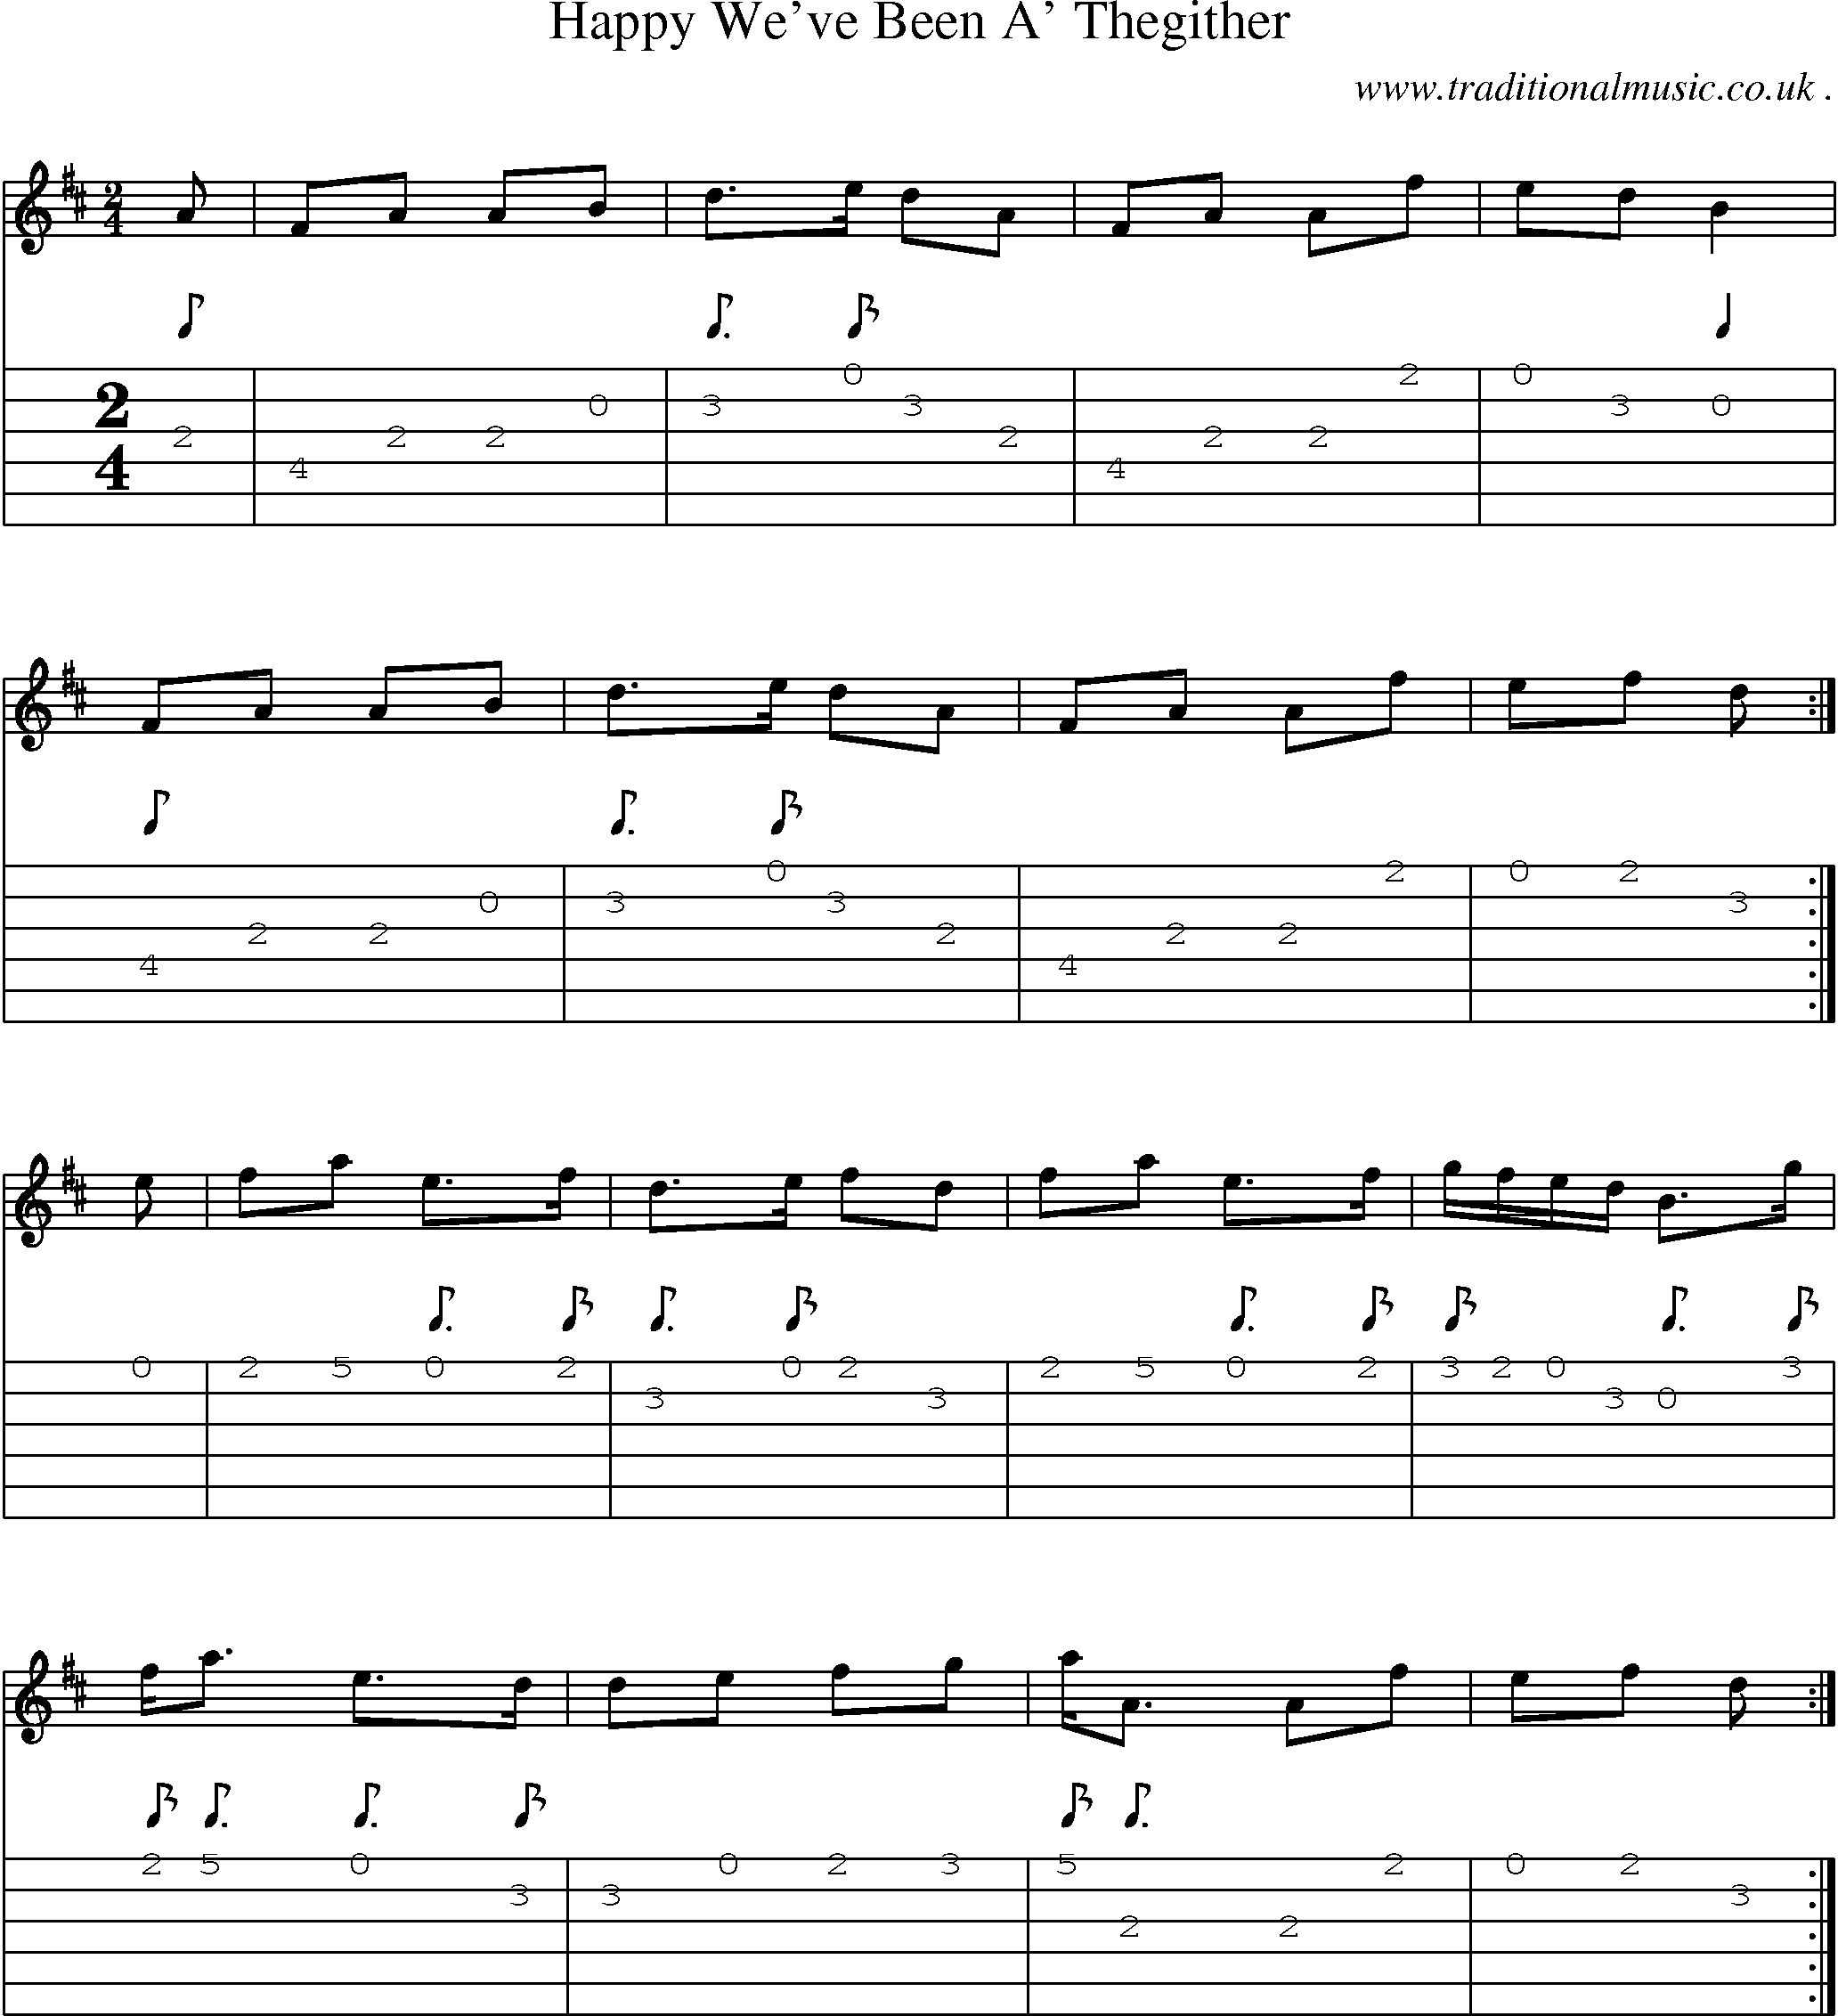 Sheet-music  score, Chords and Guitar Tabs for Happy Weve Been A Thegither